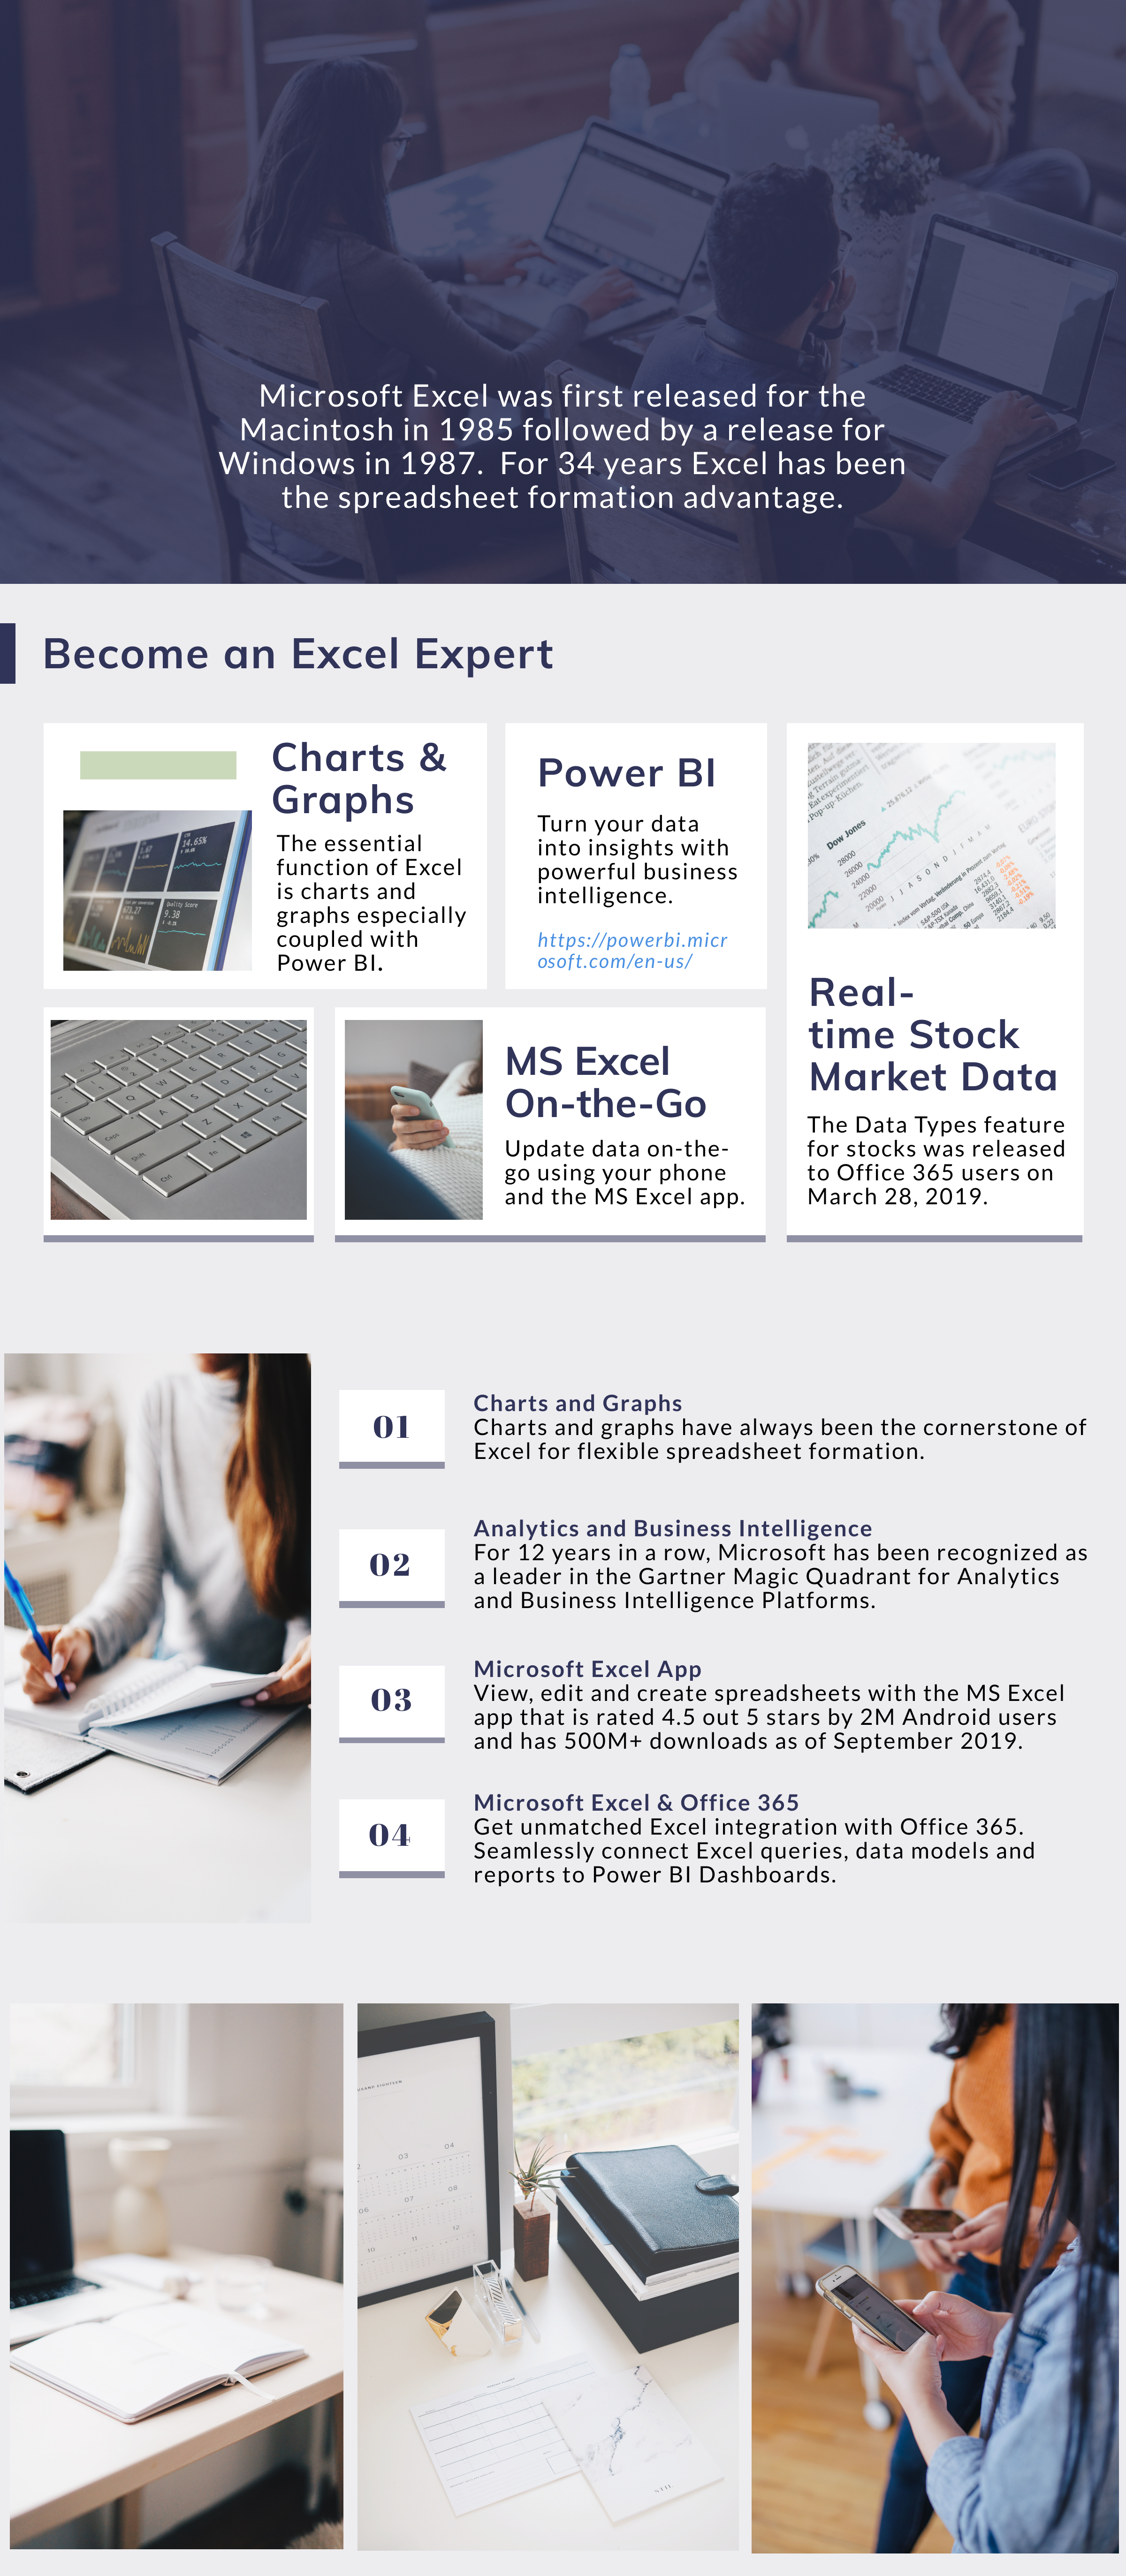 Infographic to show key features of becoming a Microsoft Excel expert. Power BI, real-time sock market data, MS Excel on the go.